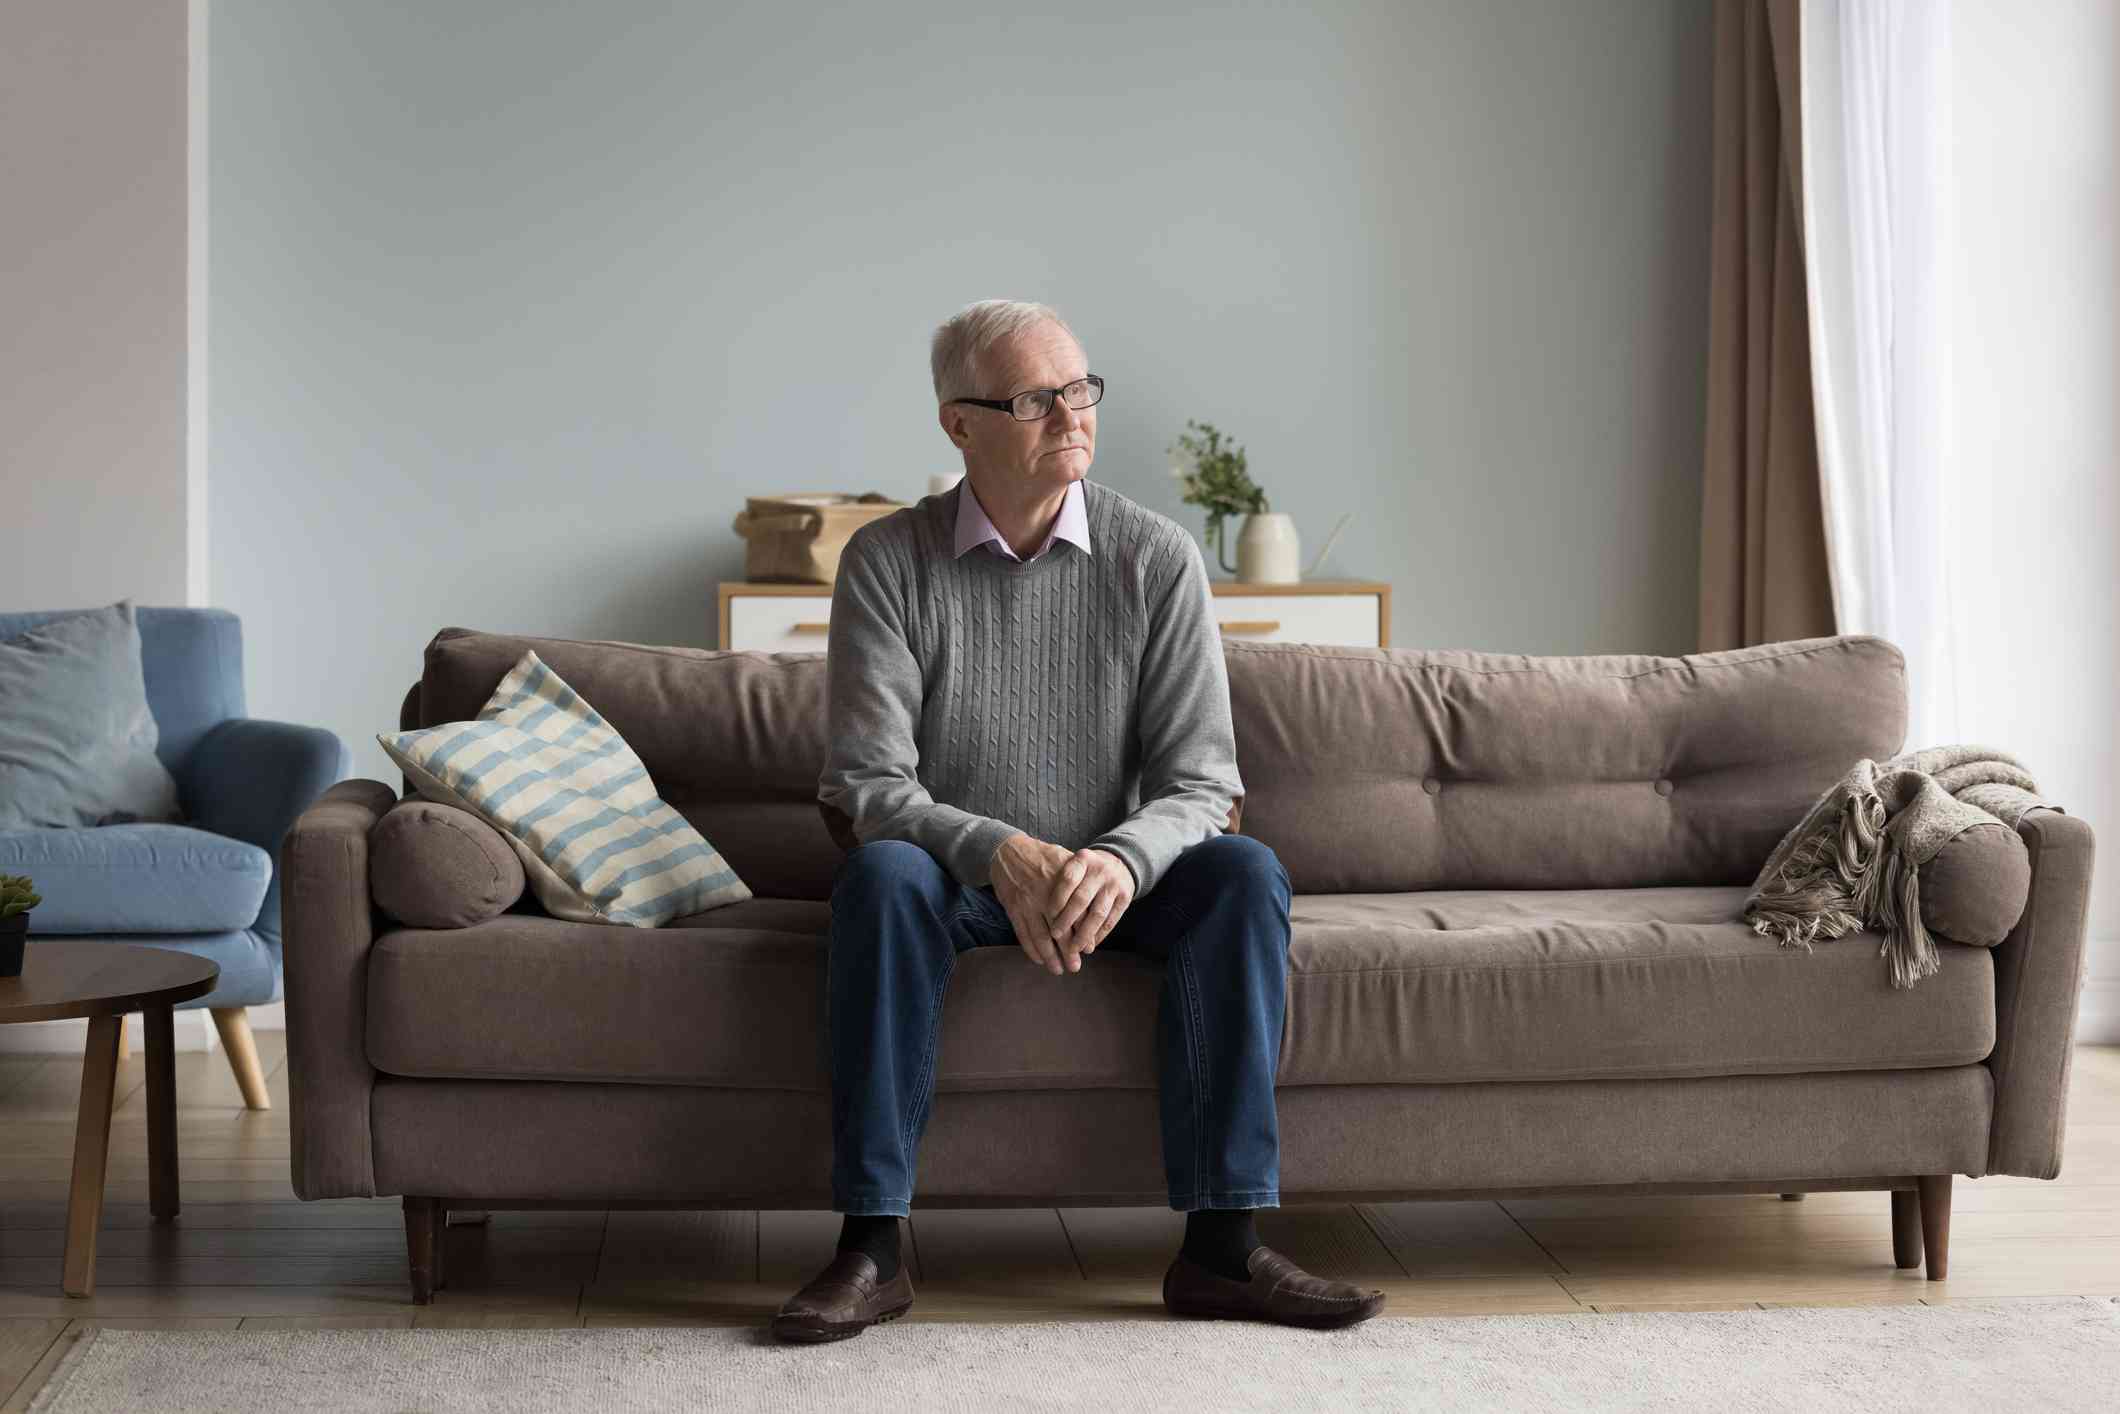 An elderly man in a grey sweater sits in the middle of a couch and gazes off with a sad expression.